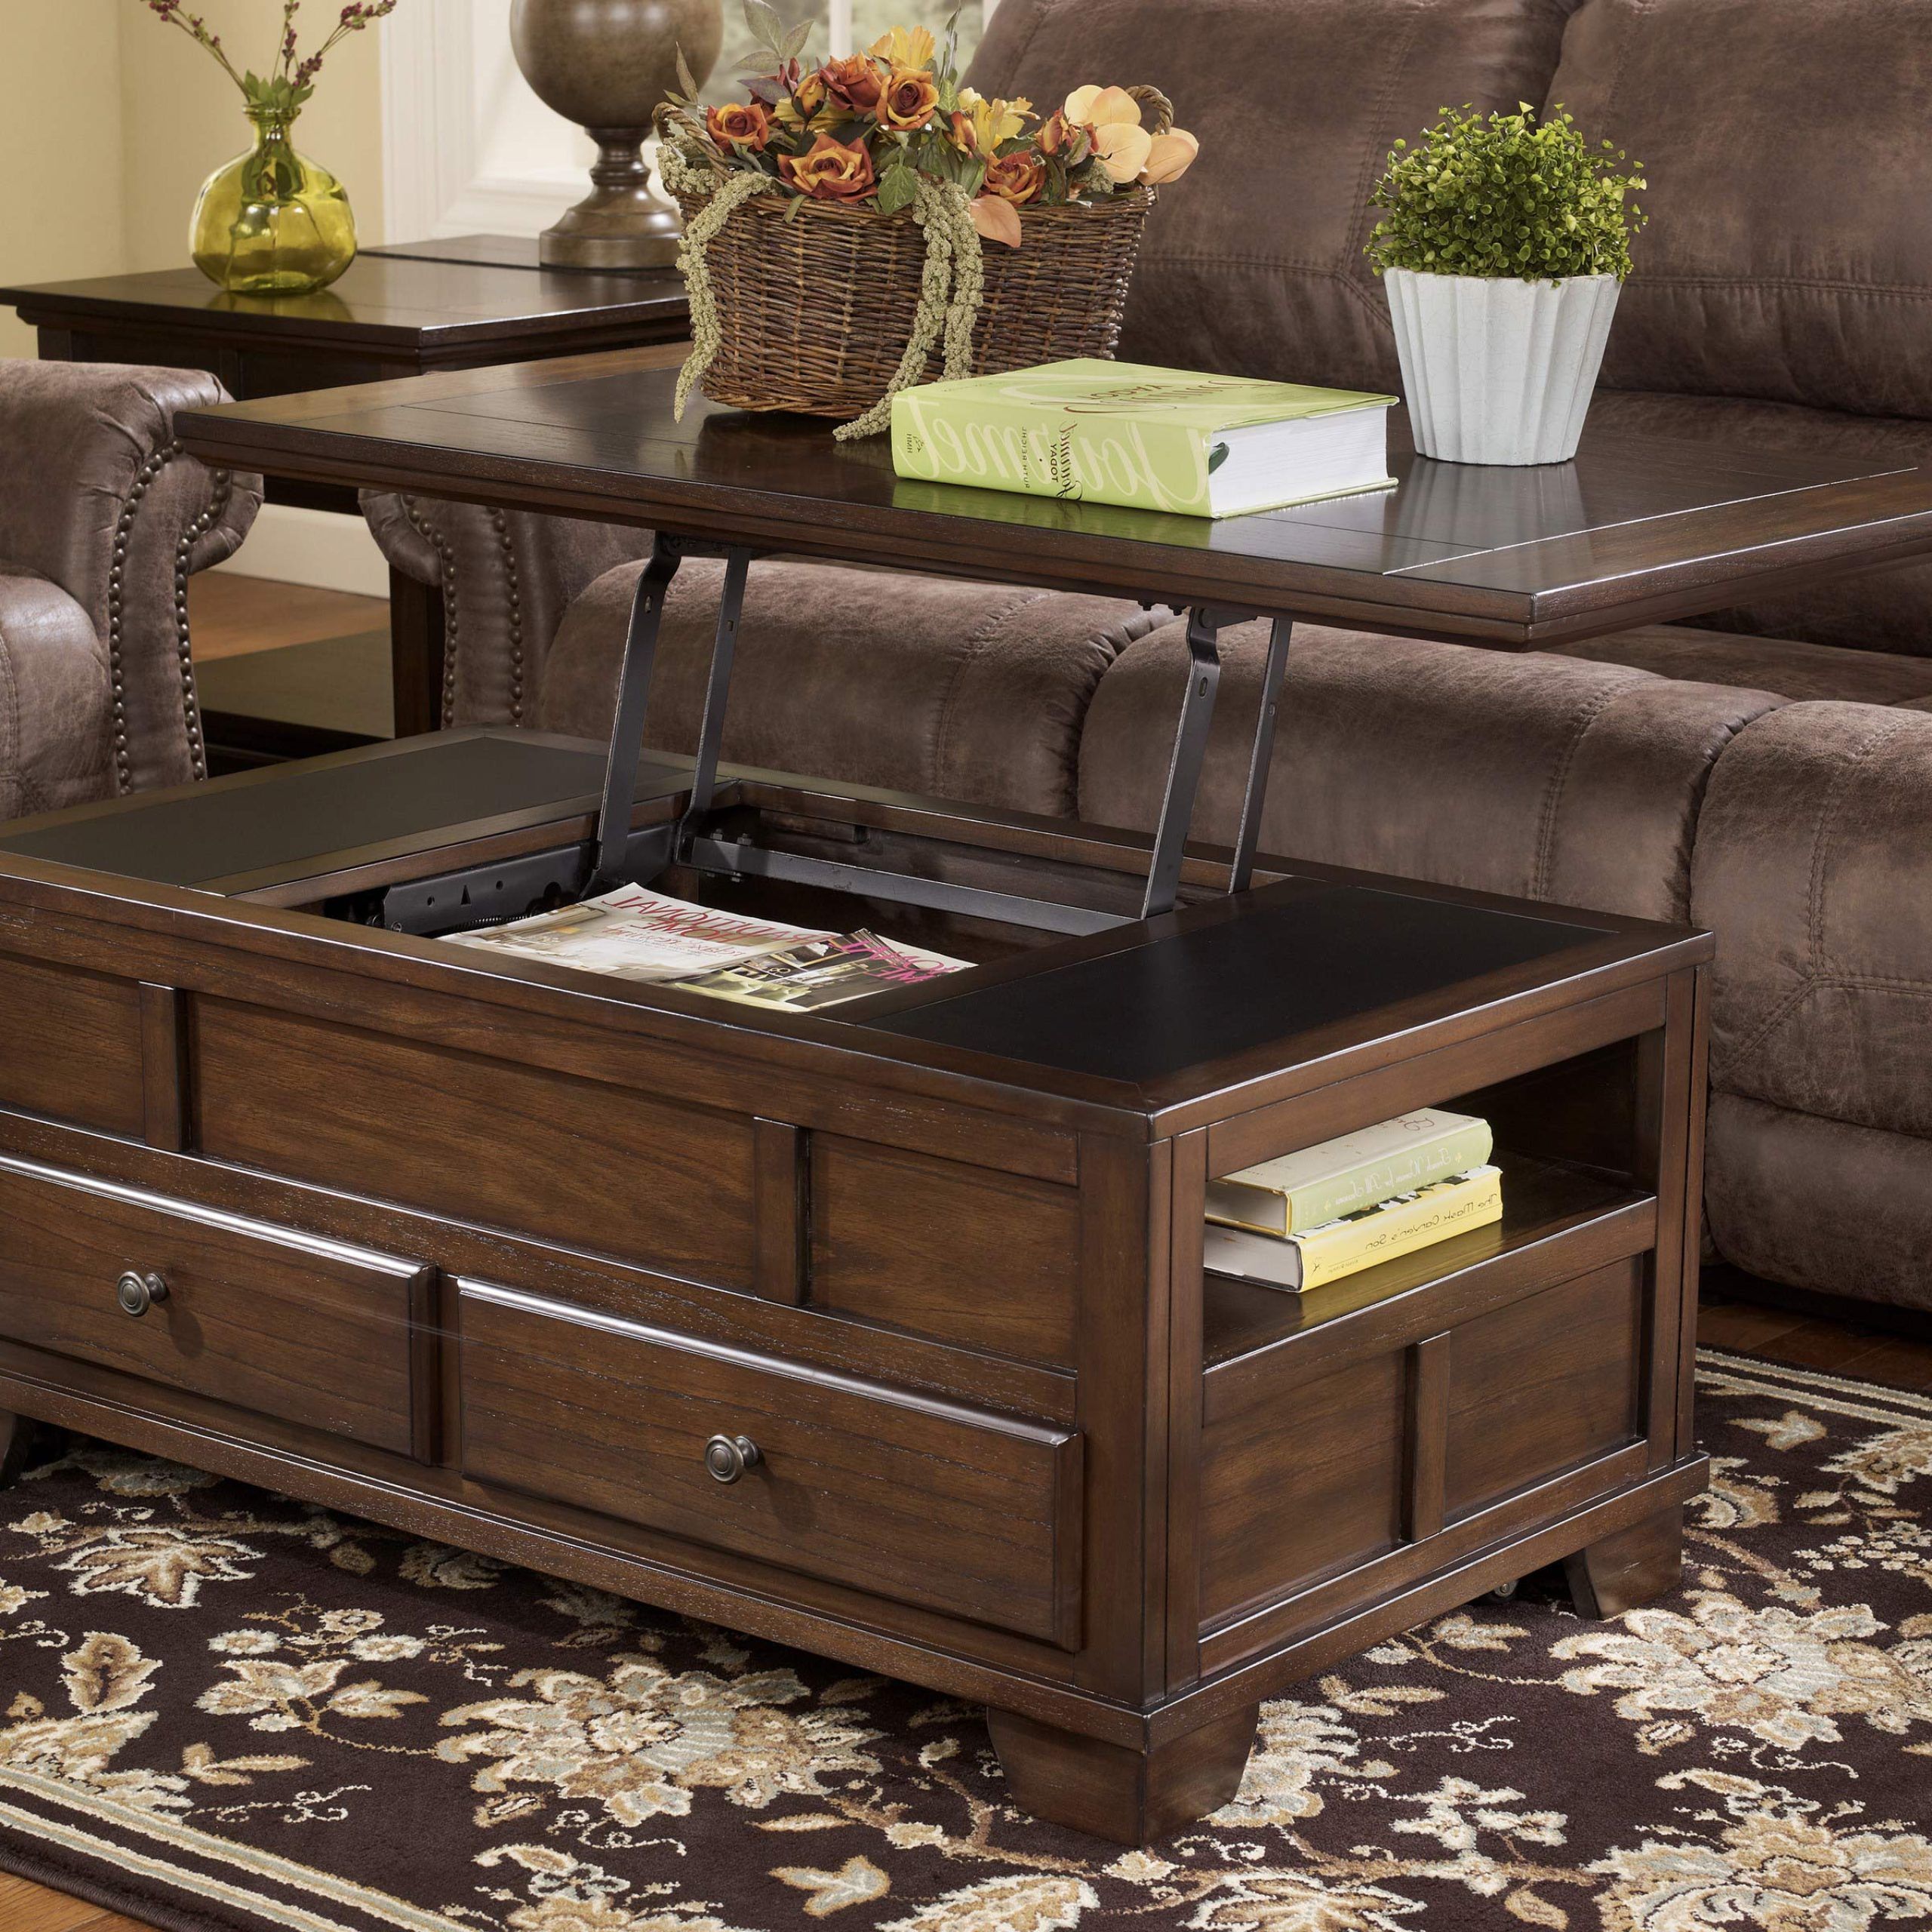 Lift Top Coffee Tables With Storage With Regard To Lift Top Coffee Tables (View 5 of 15)